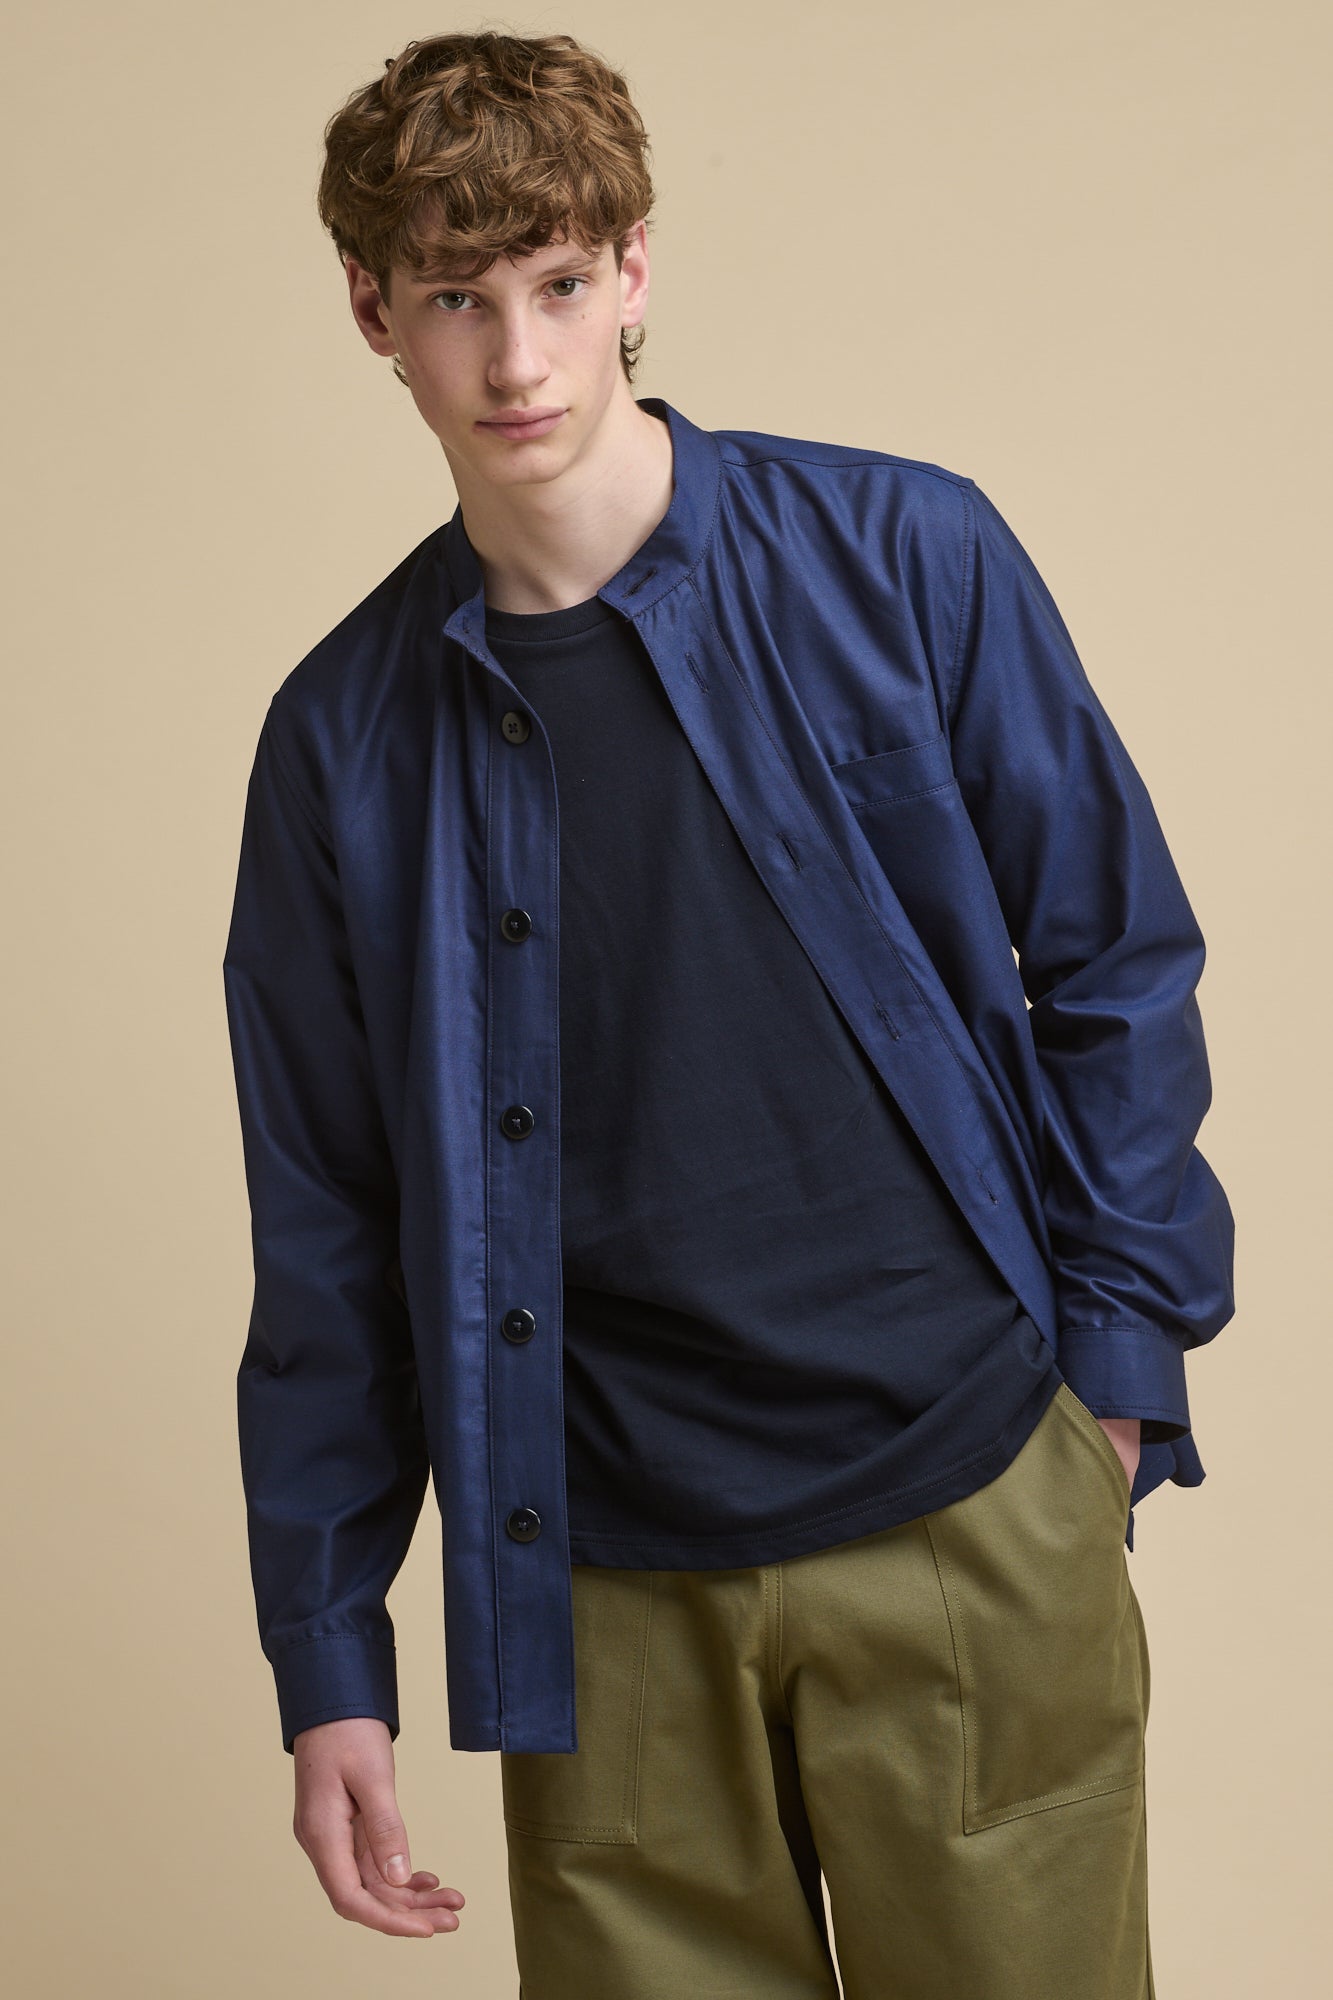 Thigh up image of male wearing George Lightweight Collarless Overshirt unbuttoned over navy t shirt paired with Cameraman Pants in olive